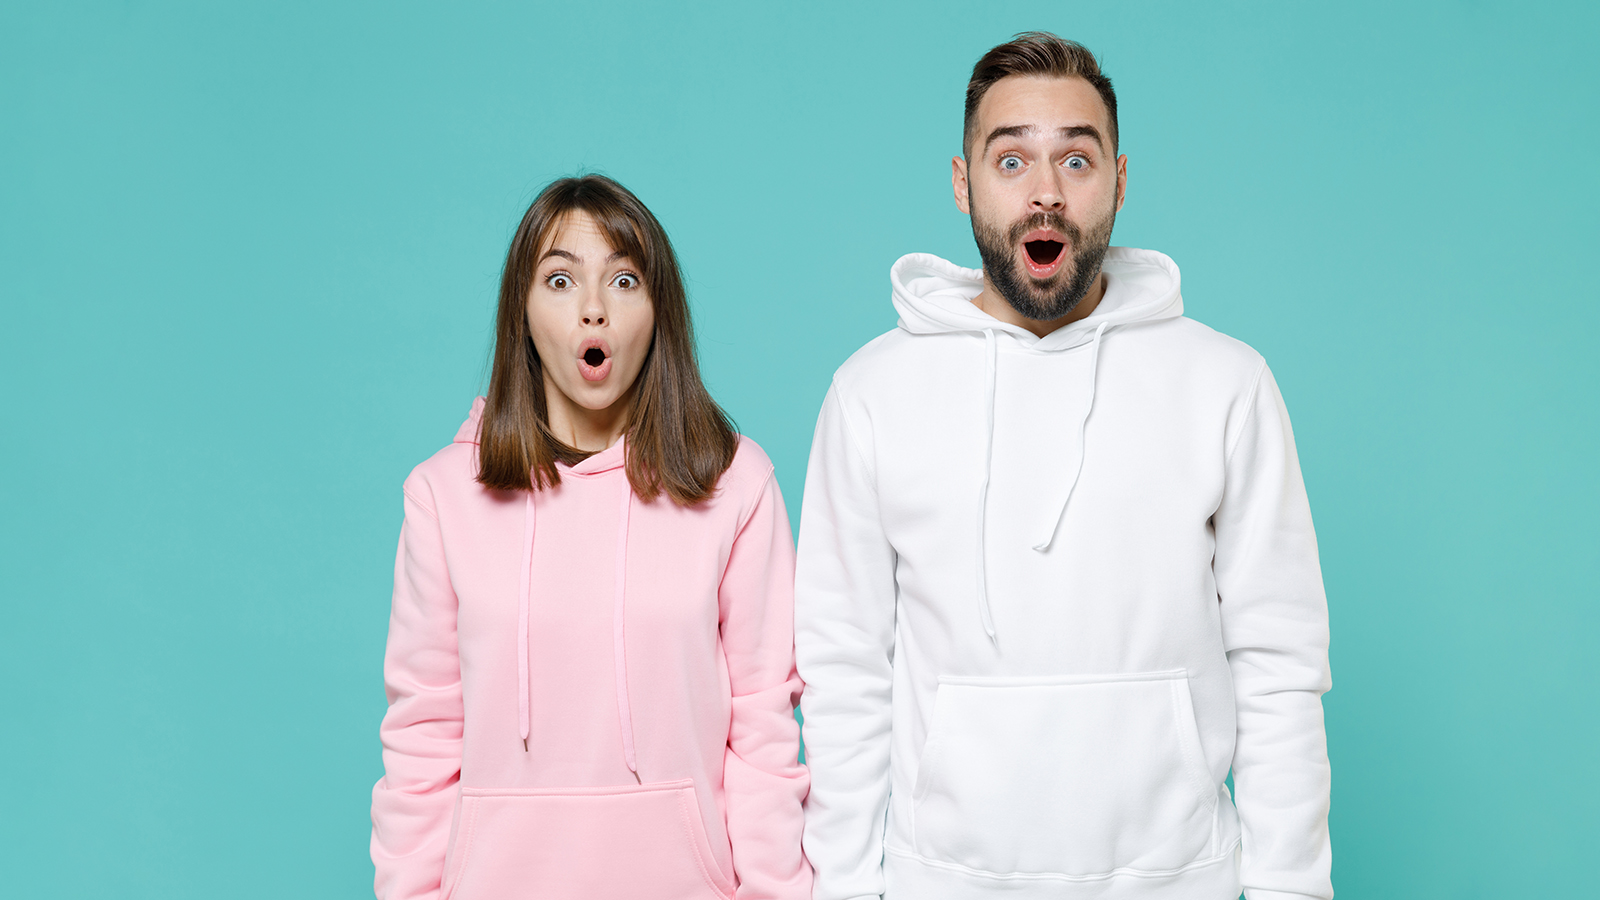 Shocked amazed young couple two friends man woman 20s wearing white pink casual hoodie standing keeping mouth open looking camera isolated on blue turquoise colour wall background studio portrait